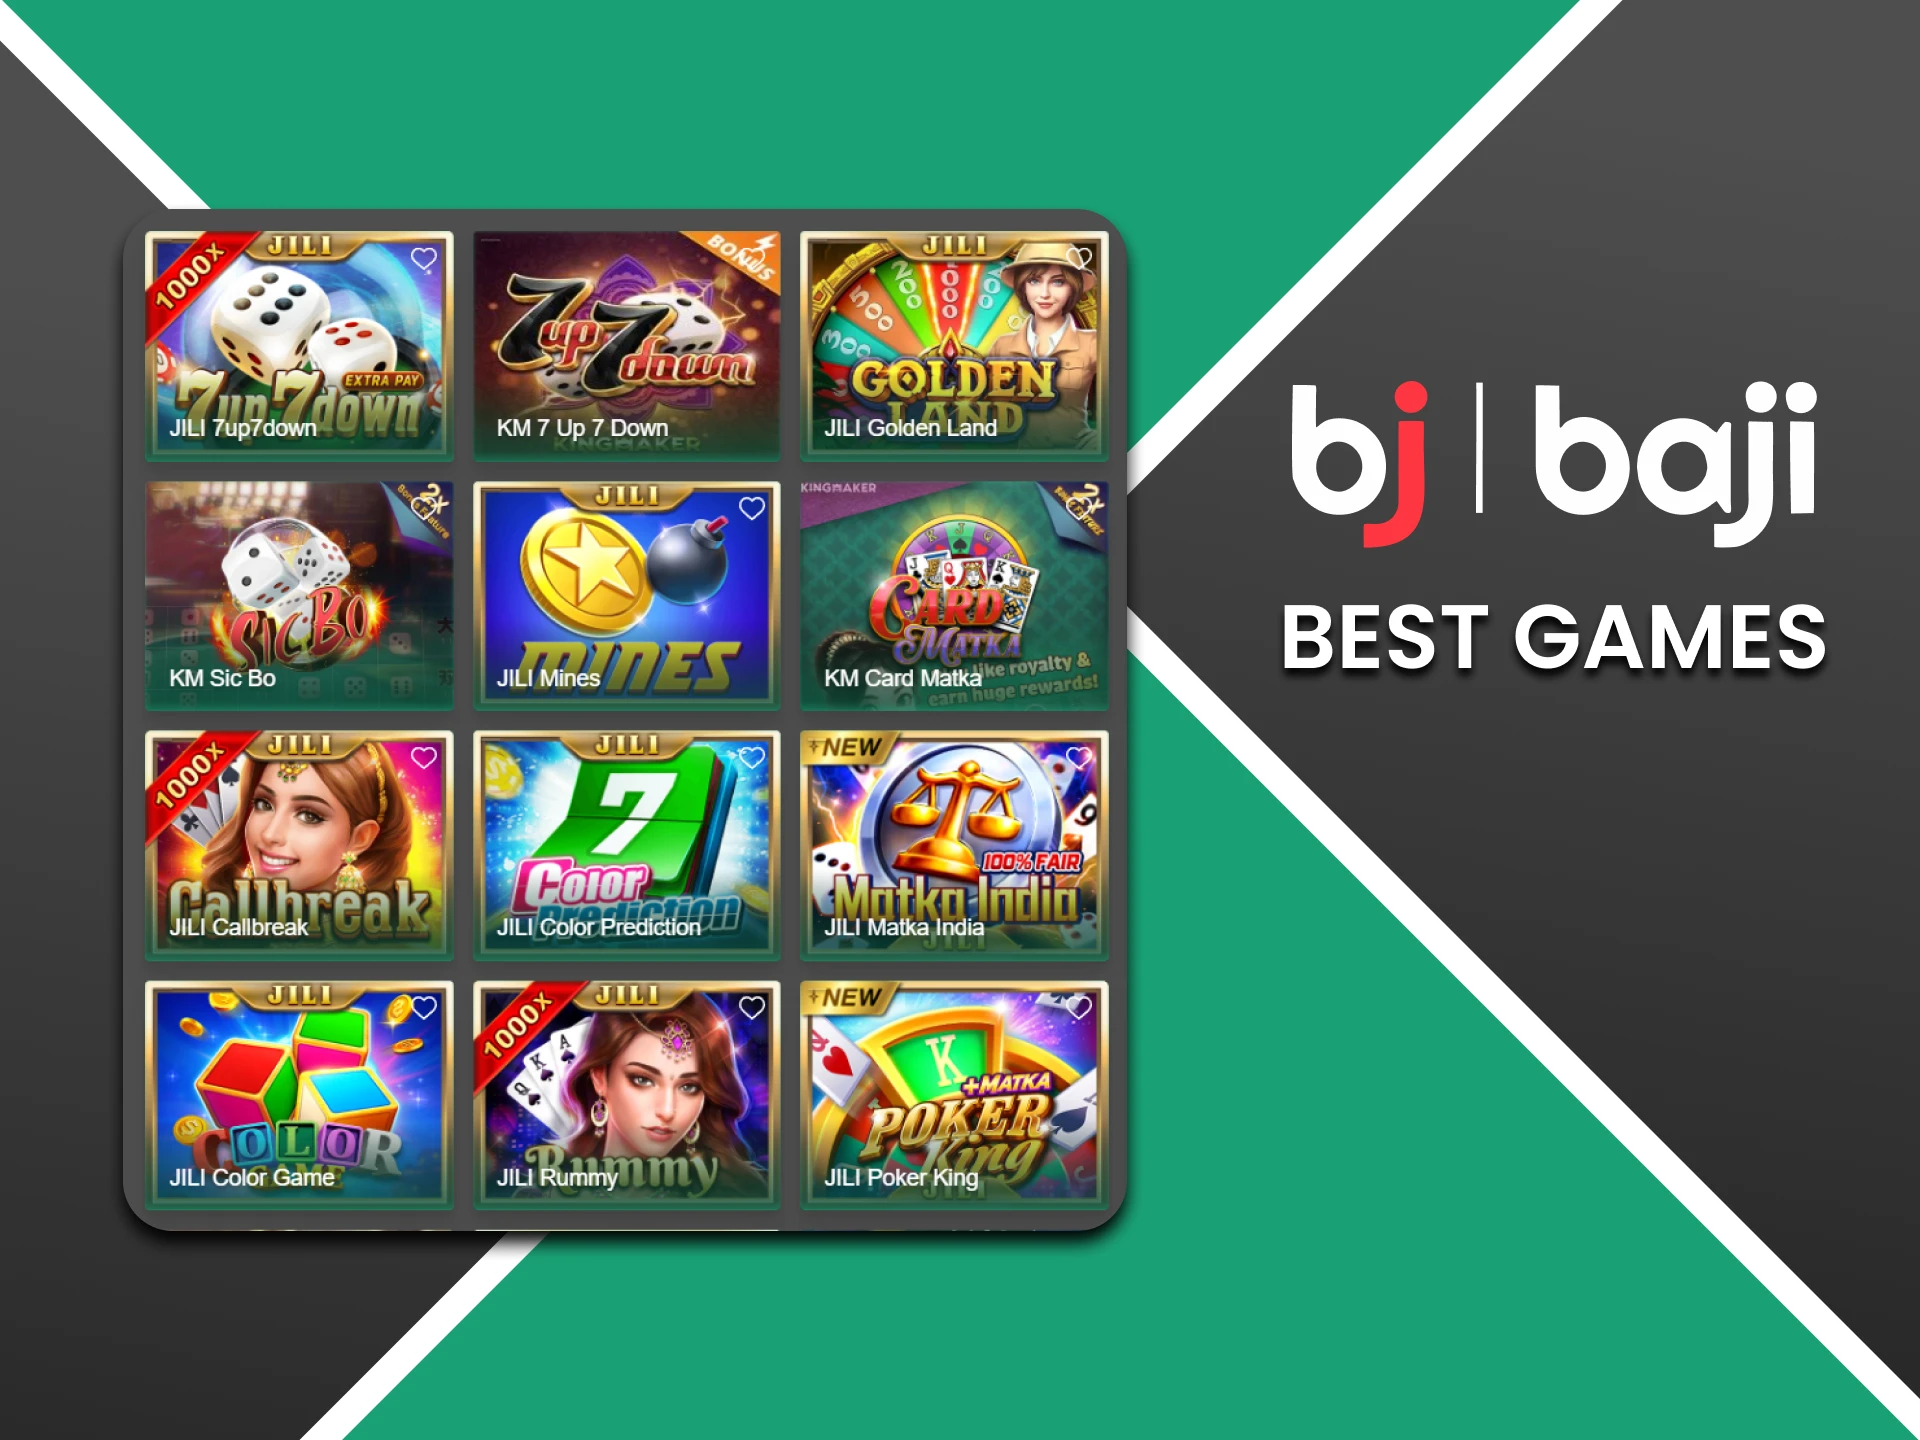 We will tell you about the best games for the table games section from Baji.